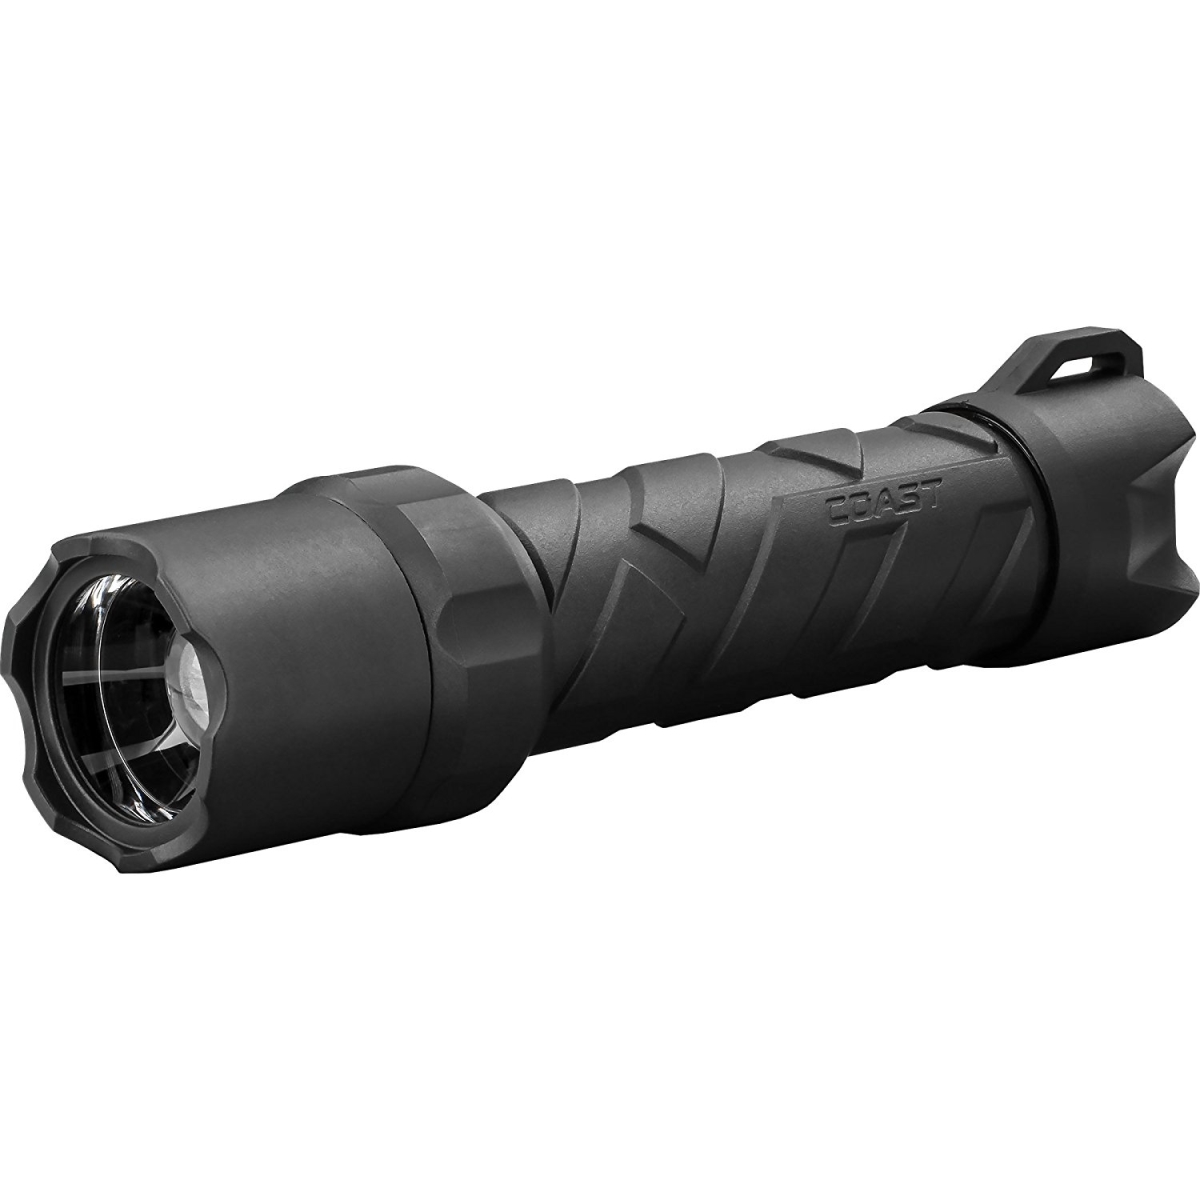 Polyester 600r 530 Lm Rechargeable Waterproof Led Flashlight, Black